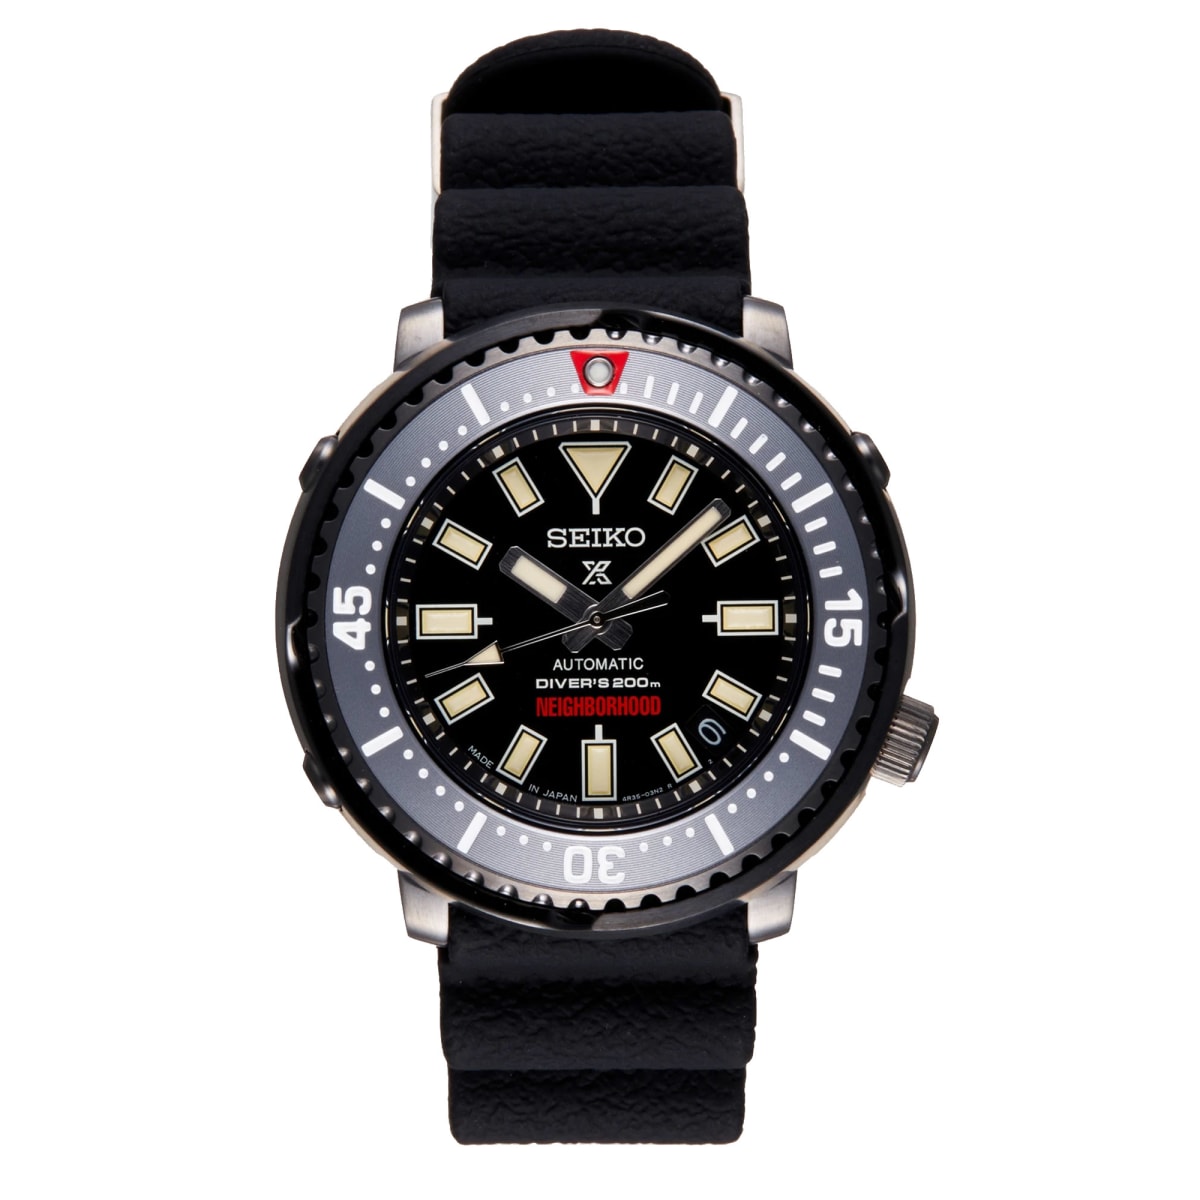 Neighborhood and Seiko reveal their special edition Prospex dive watch -  Acquire